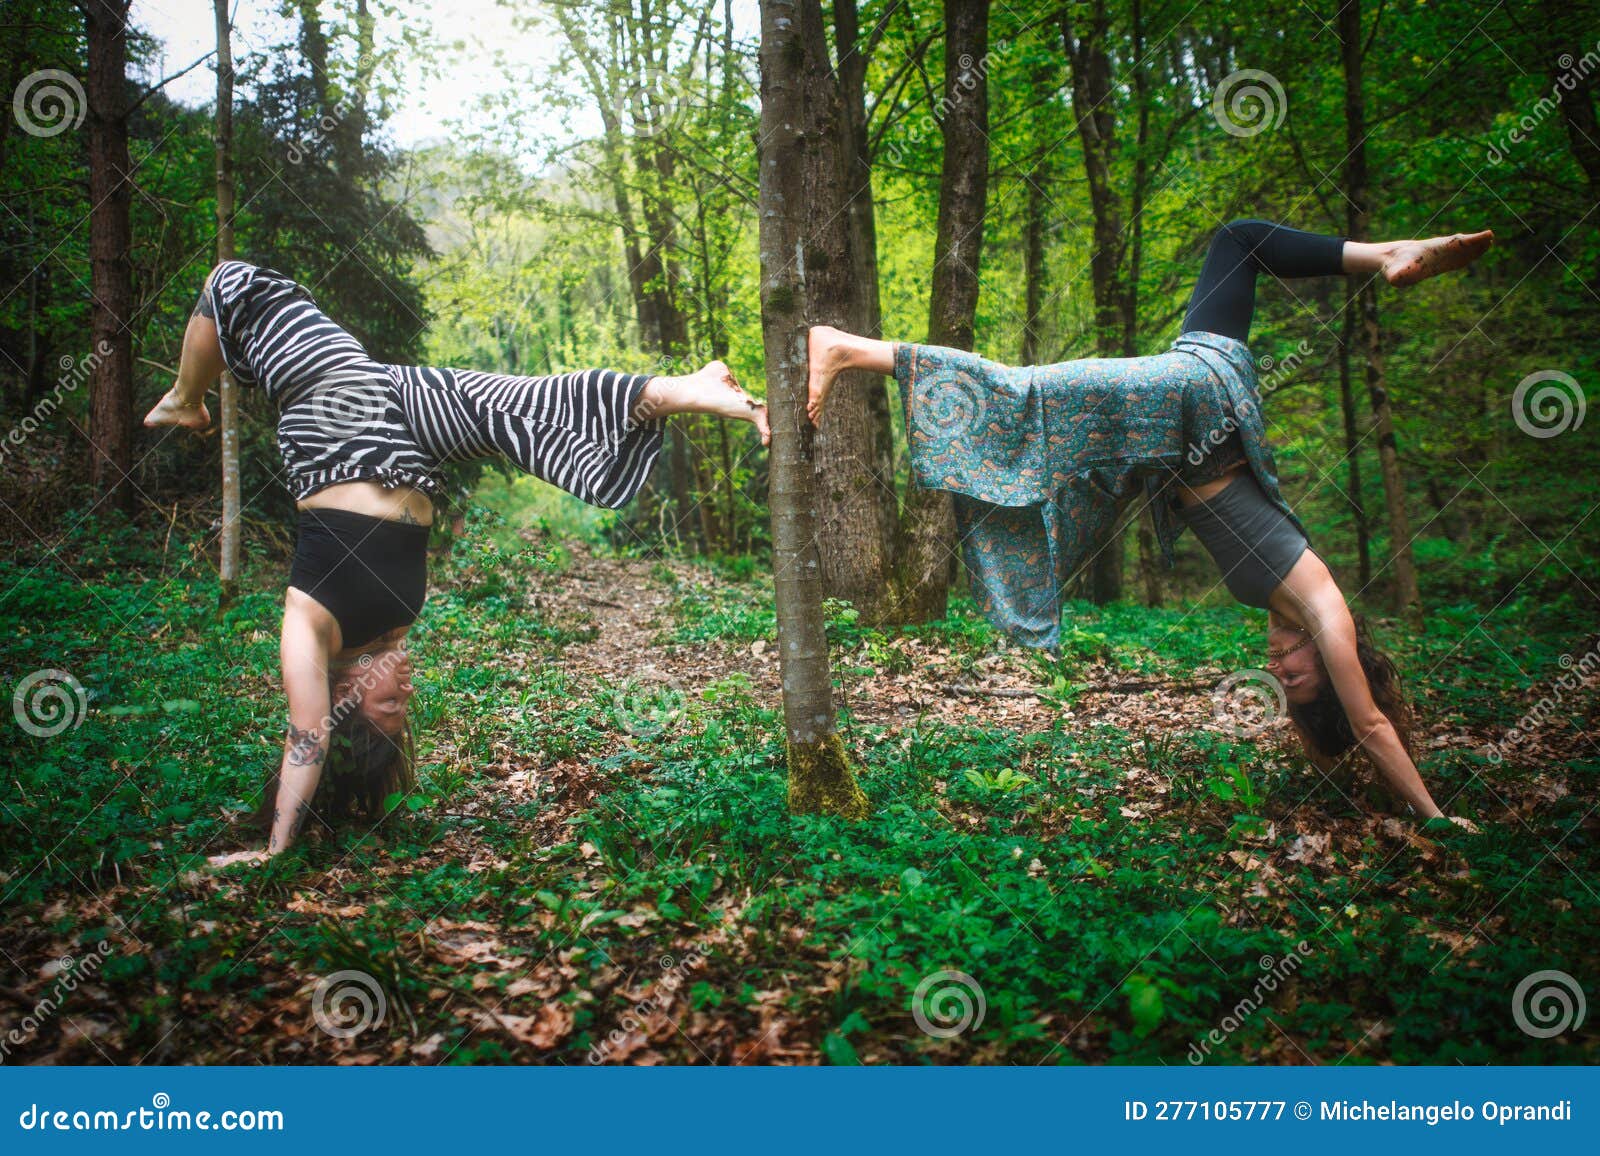 acrobatic yoga practiced by young female couple